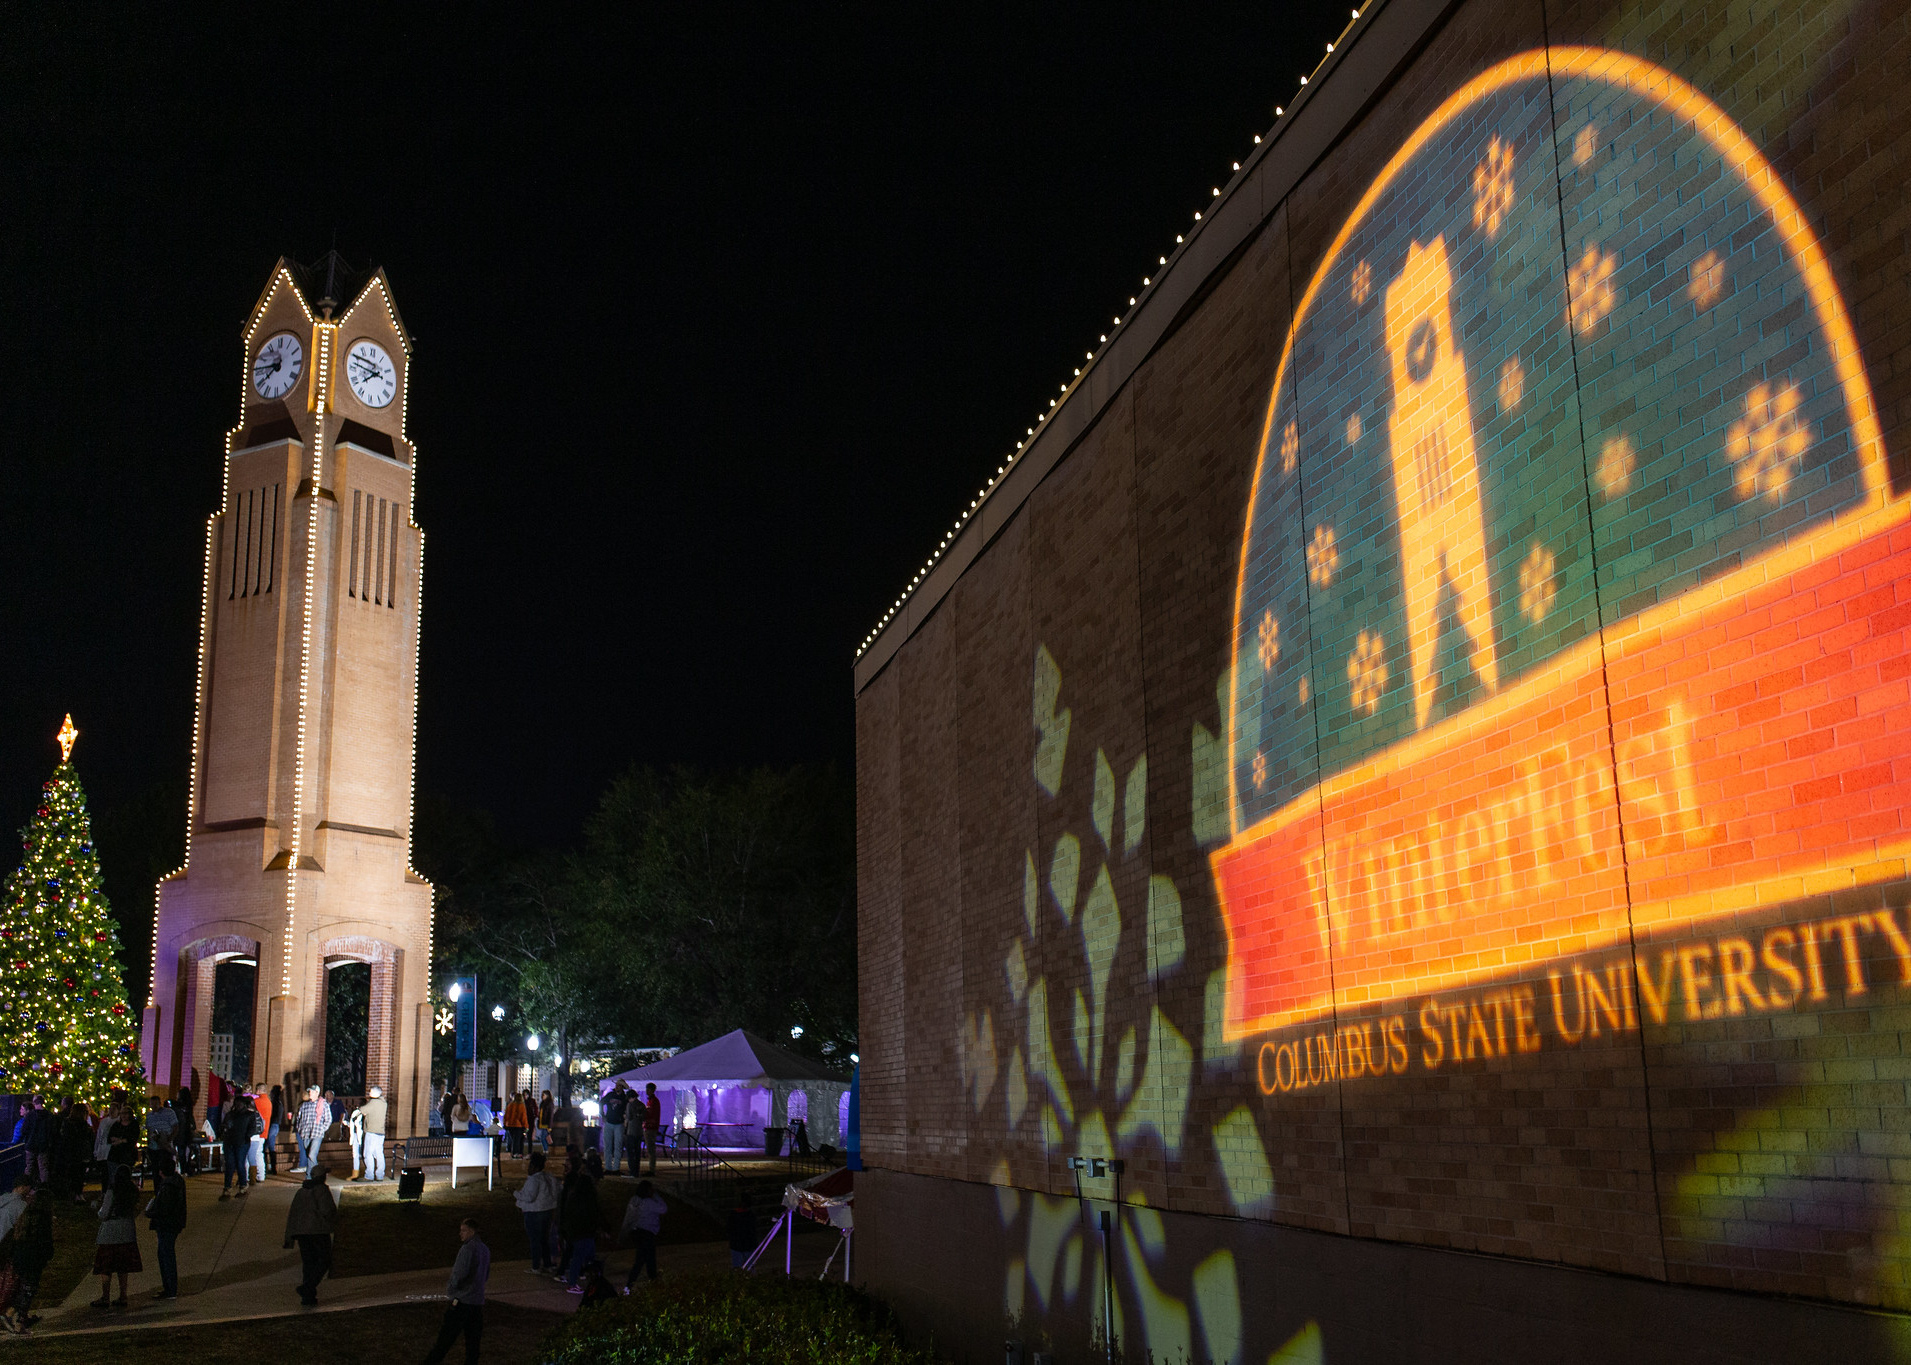 CSU clocktower is lit up next to a tall Christmas tree in the left background. In the right foreground, the Winterfest snow globe logo is reflected on a brick building.